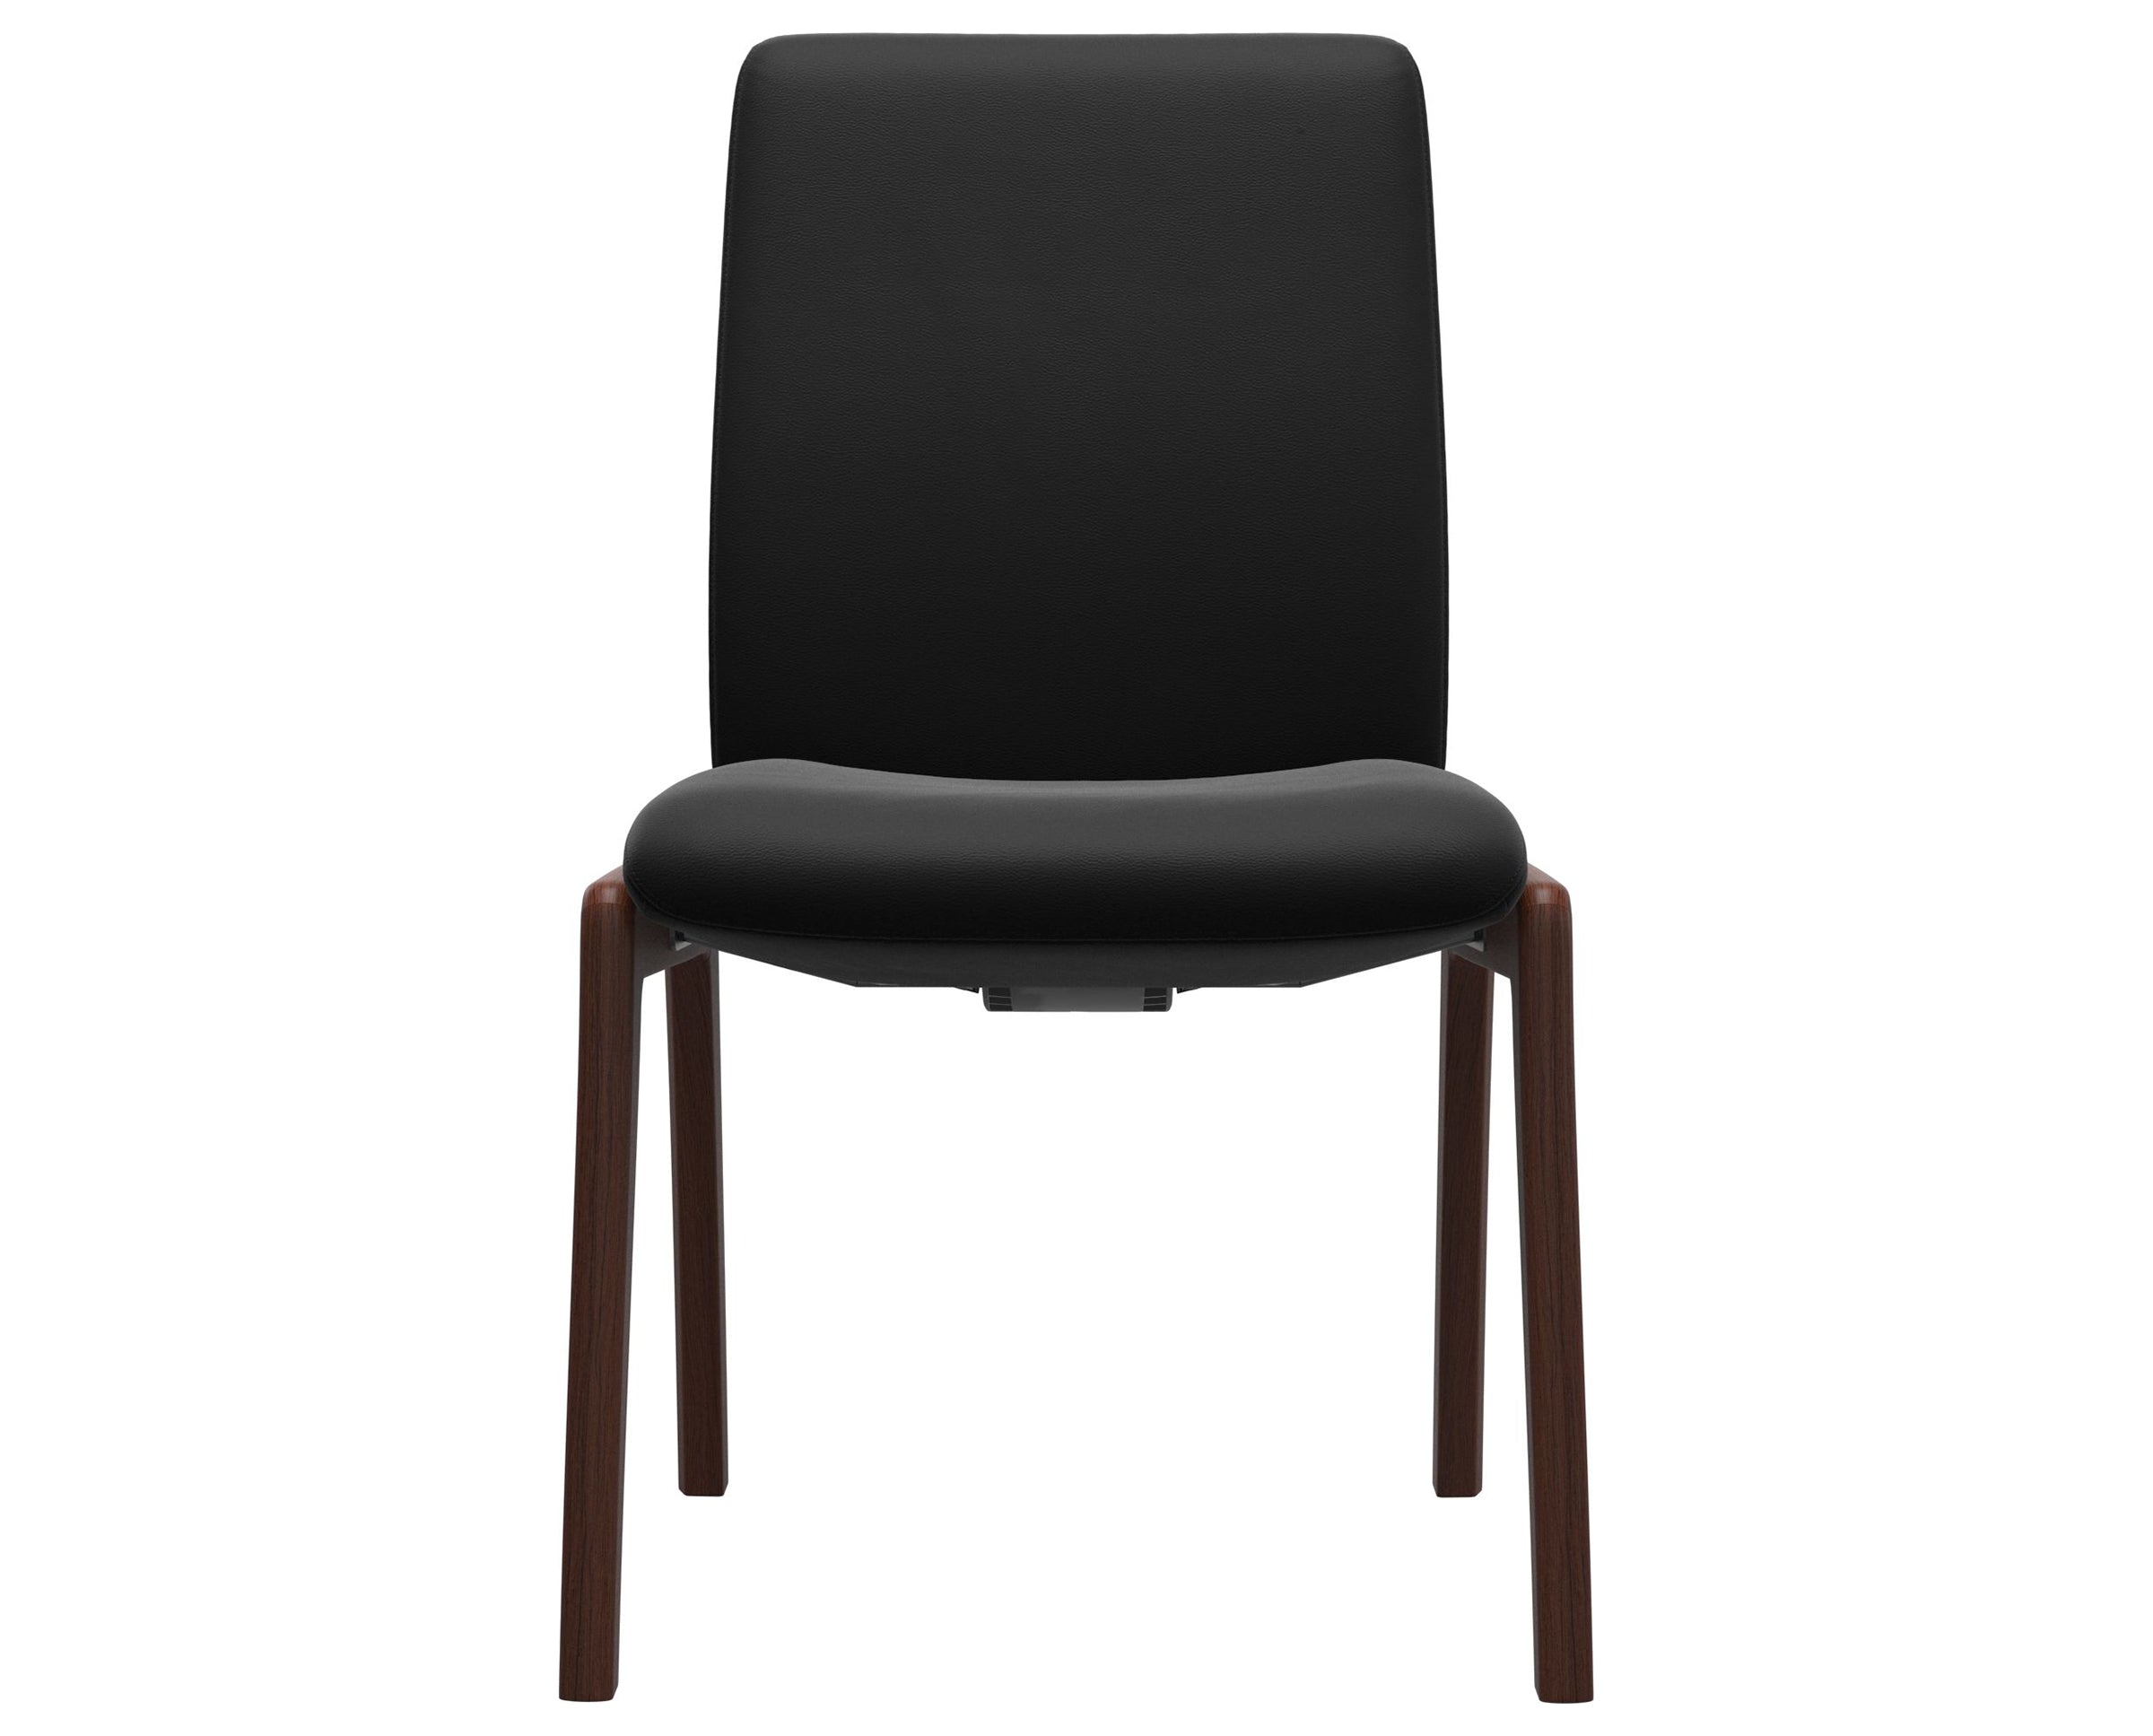 Paloma Leather Black and Walnut Base | Stressless Laurel Low Back D100 Dining Chair | Valley Ridge Furniture